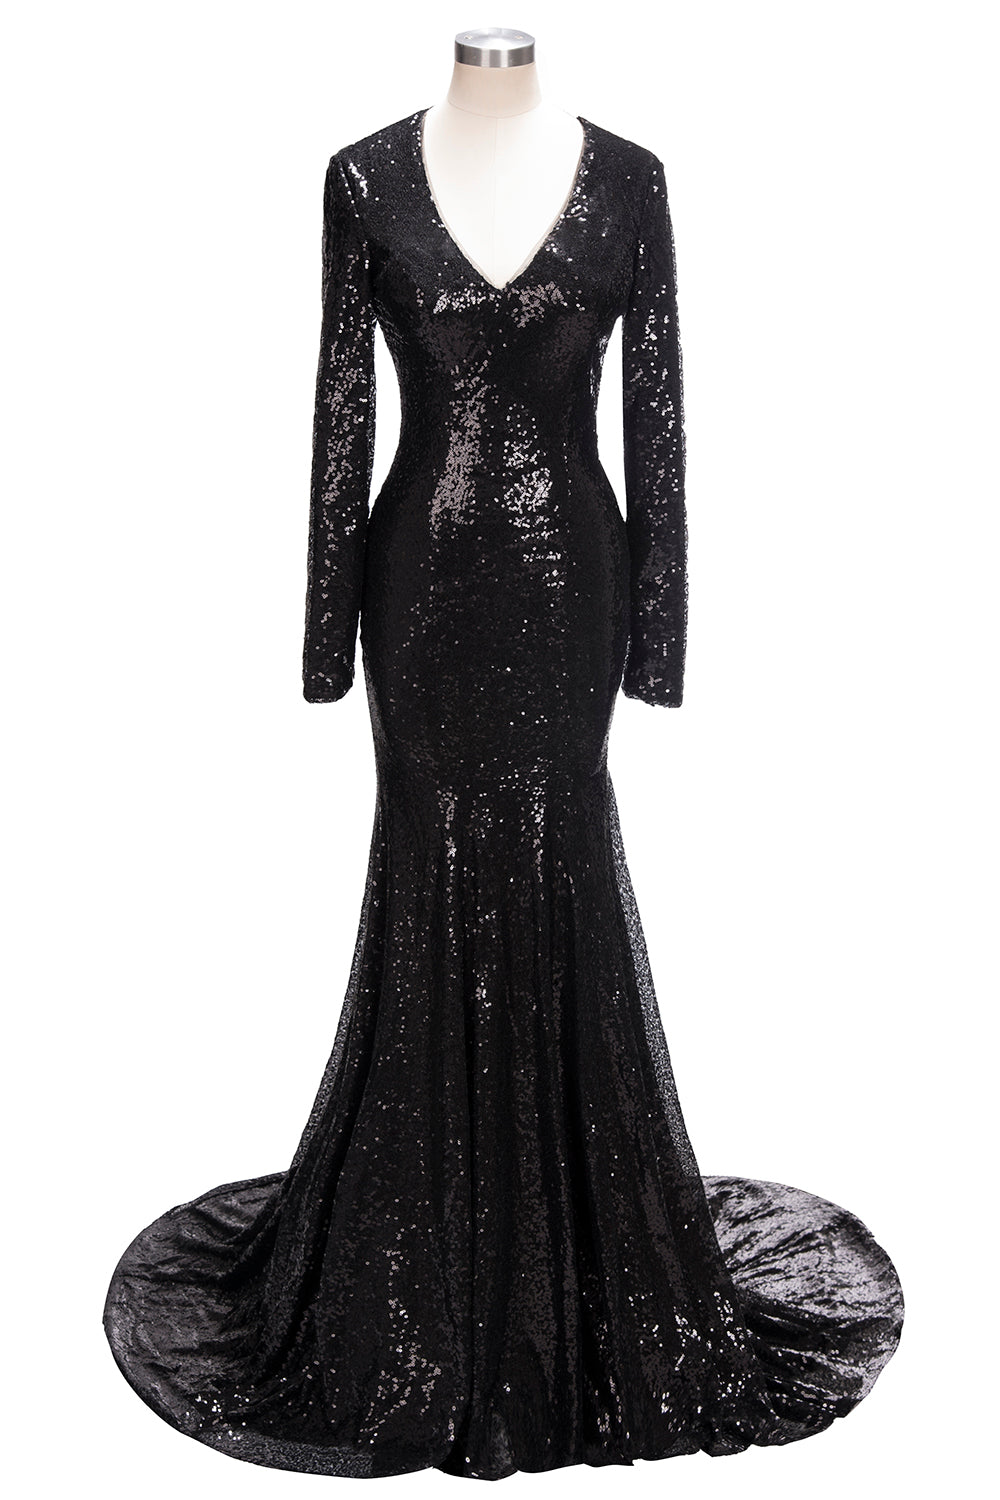 Long Mermaid V-Neck Black Sequins Prom Dresses with Sleeves